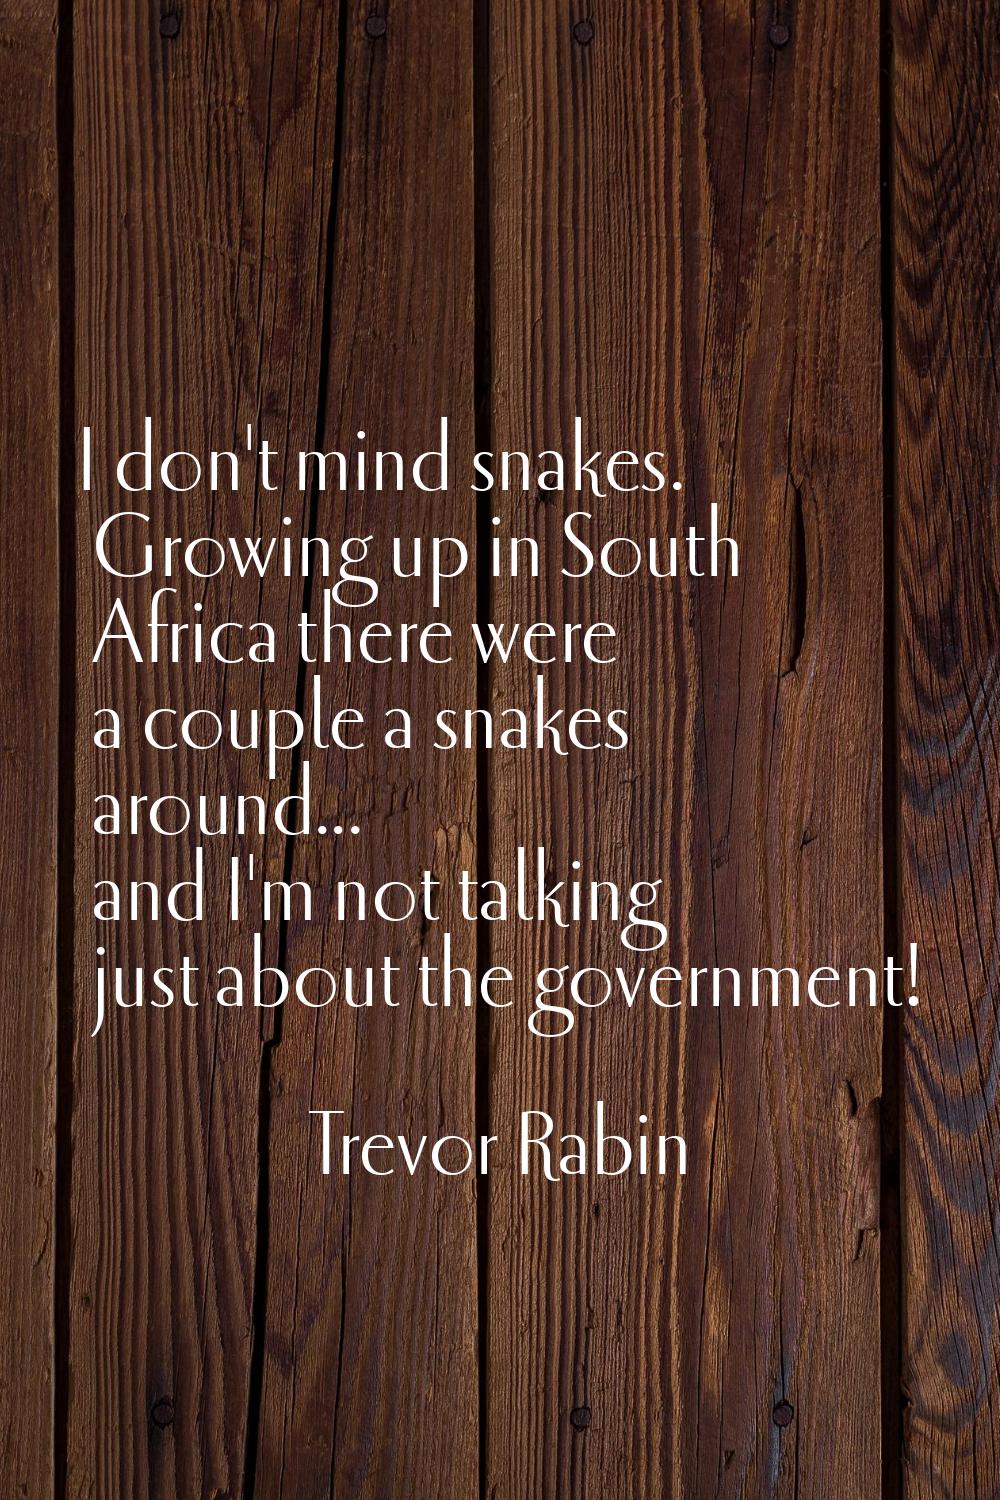 I don't mind snakes. Growing up in South Africa there were a couple a snakes around... and I'm not 